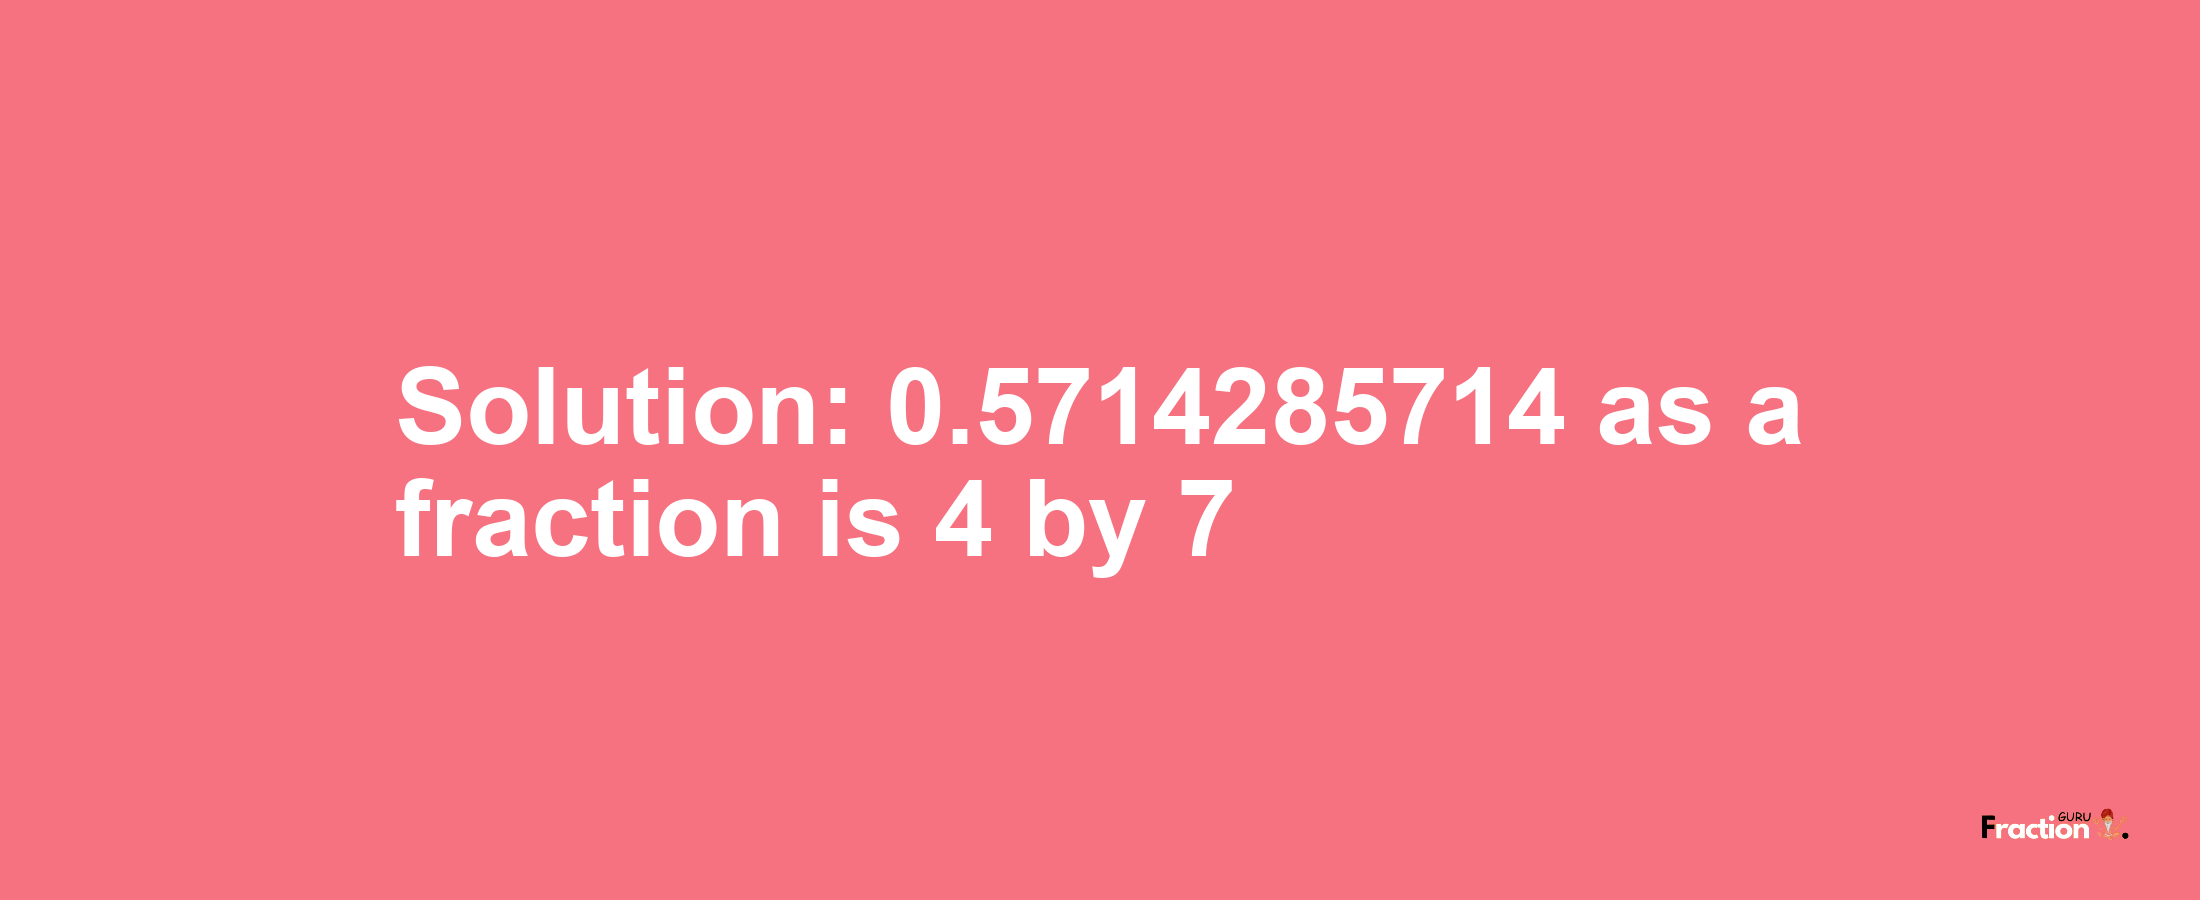 Solution:0.5714285714 as a fraction is 4/7